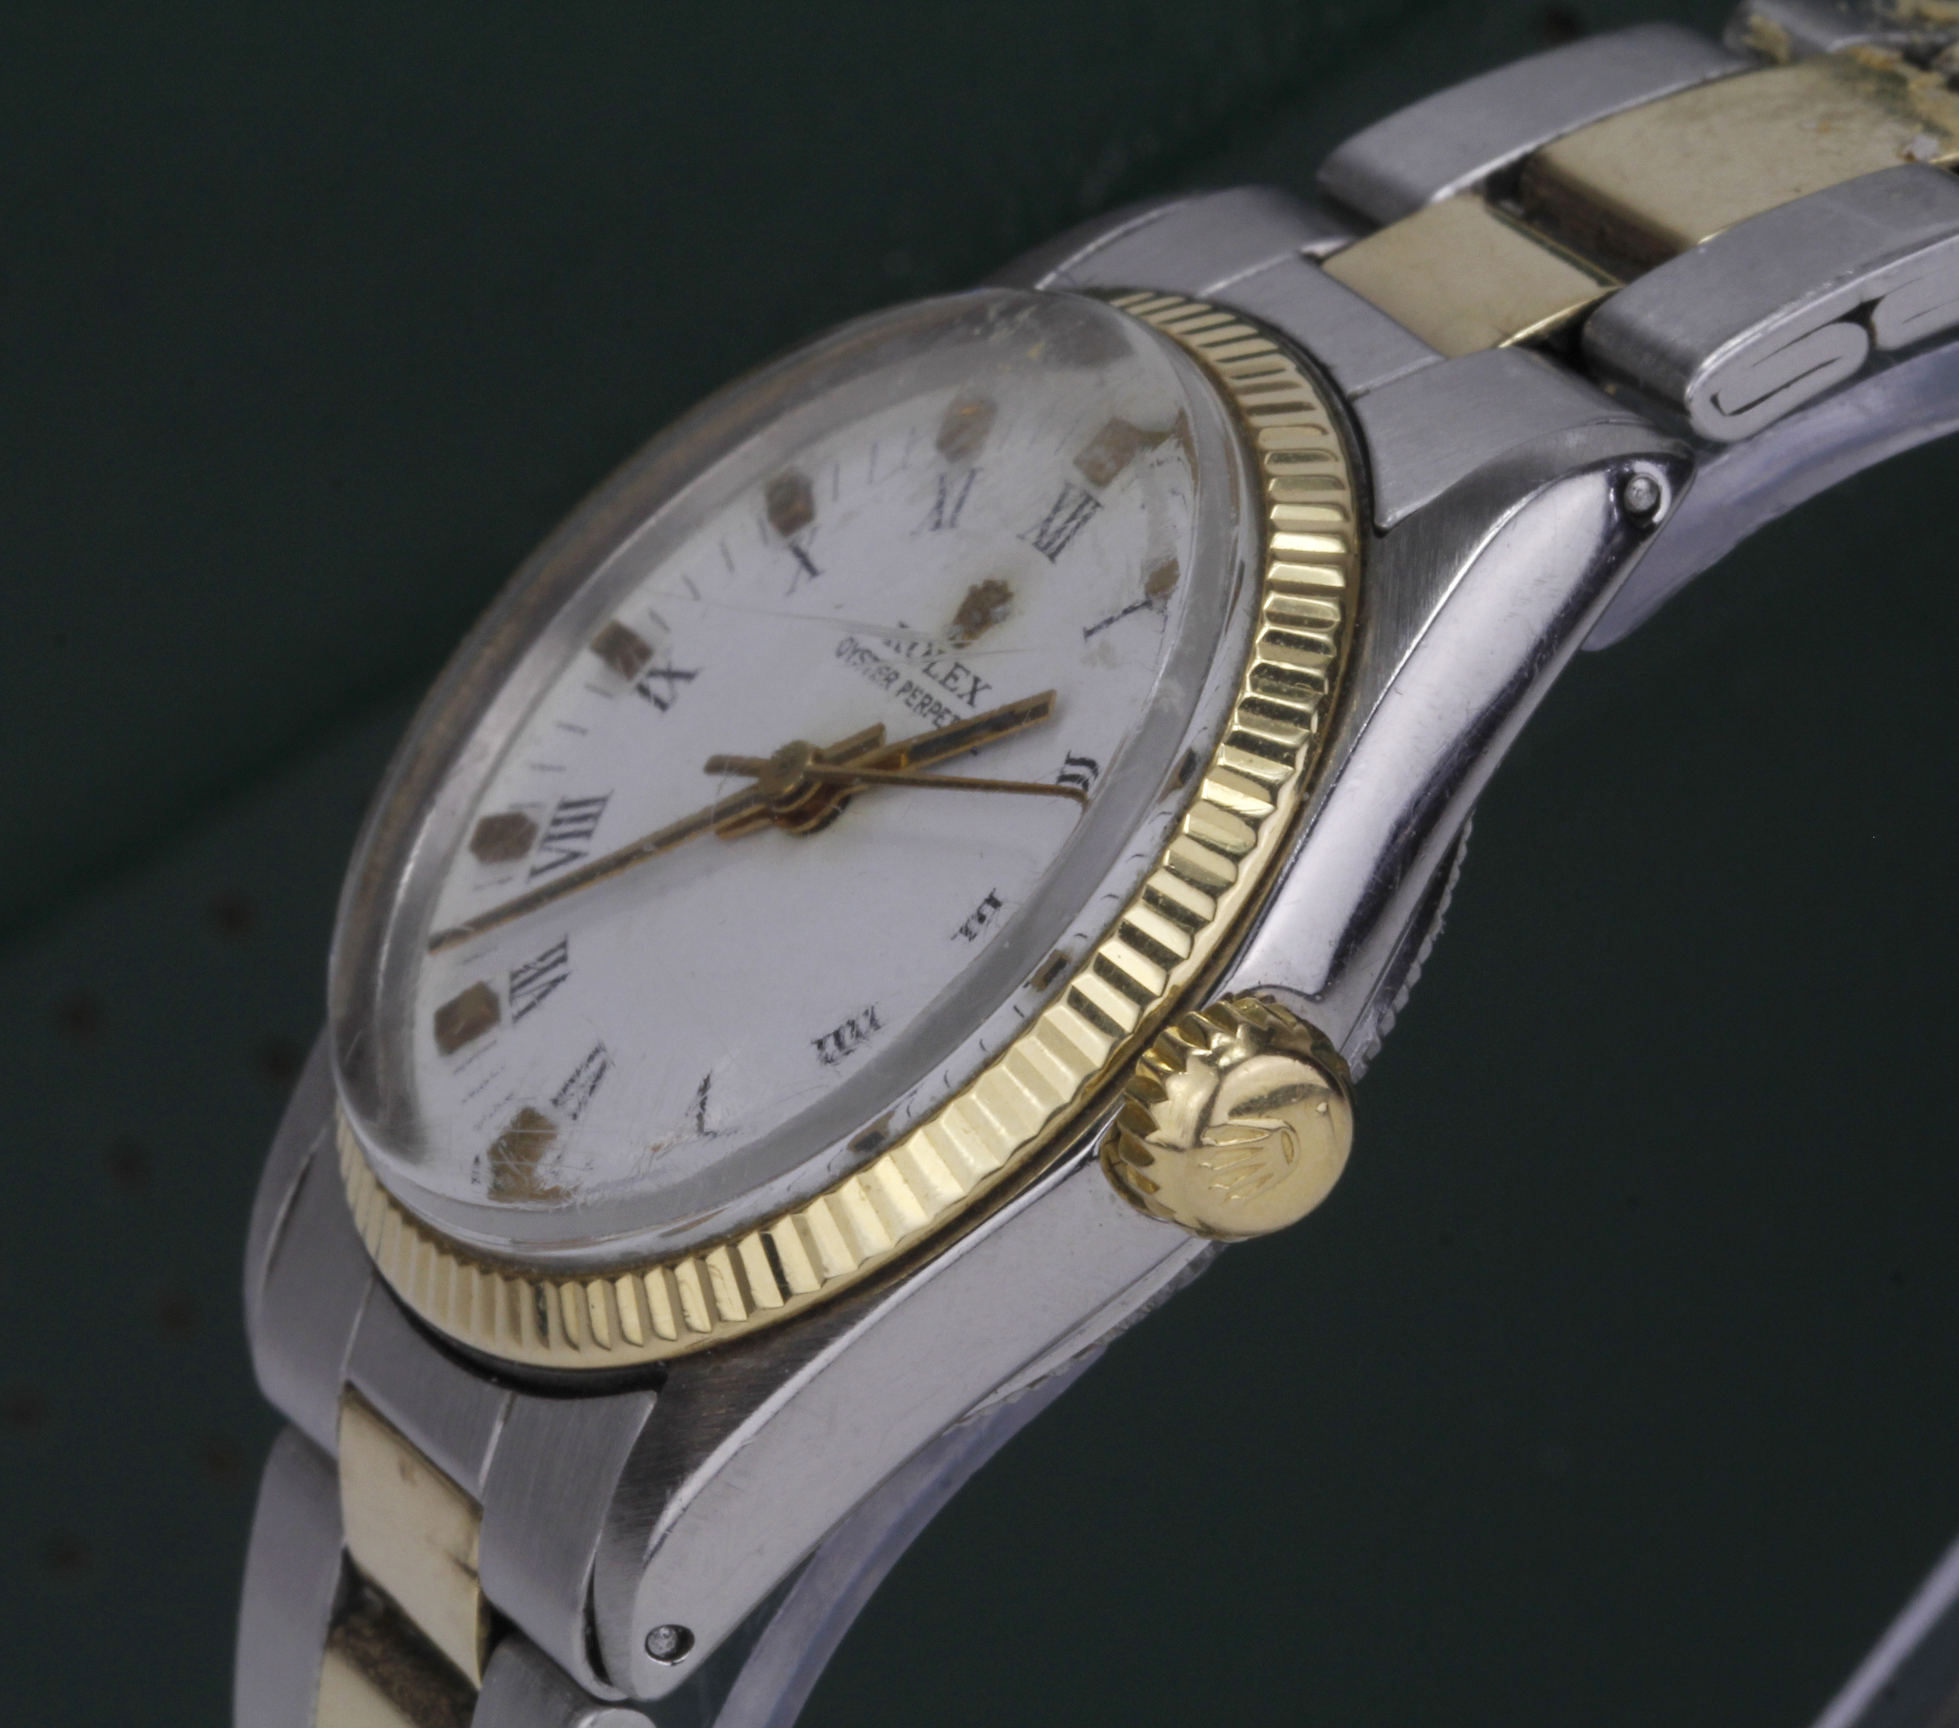 Rolex Oyster Perpetual midi wristwatch, white dial with Roman numerals, couple of scratches to - Image 3 of 3